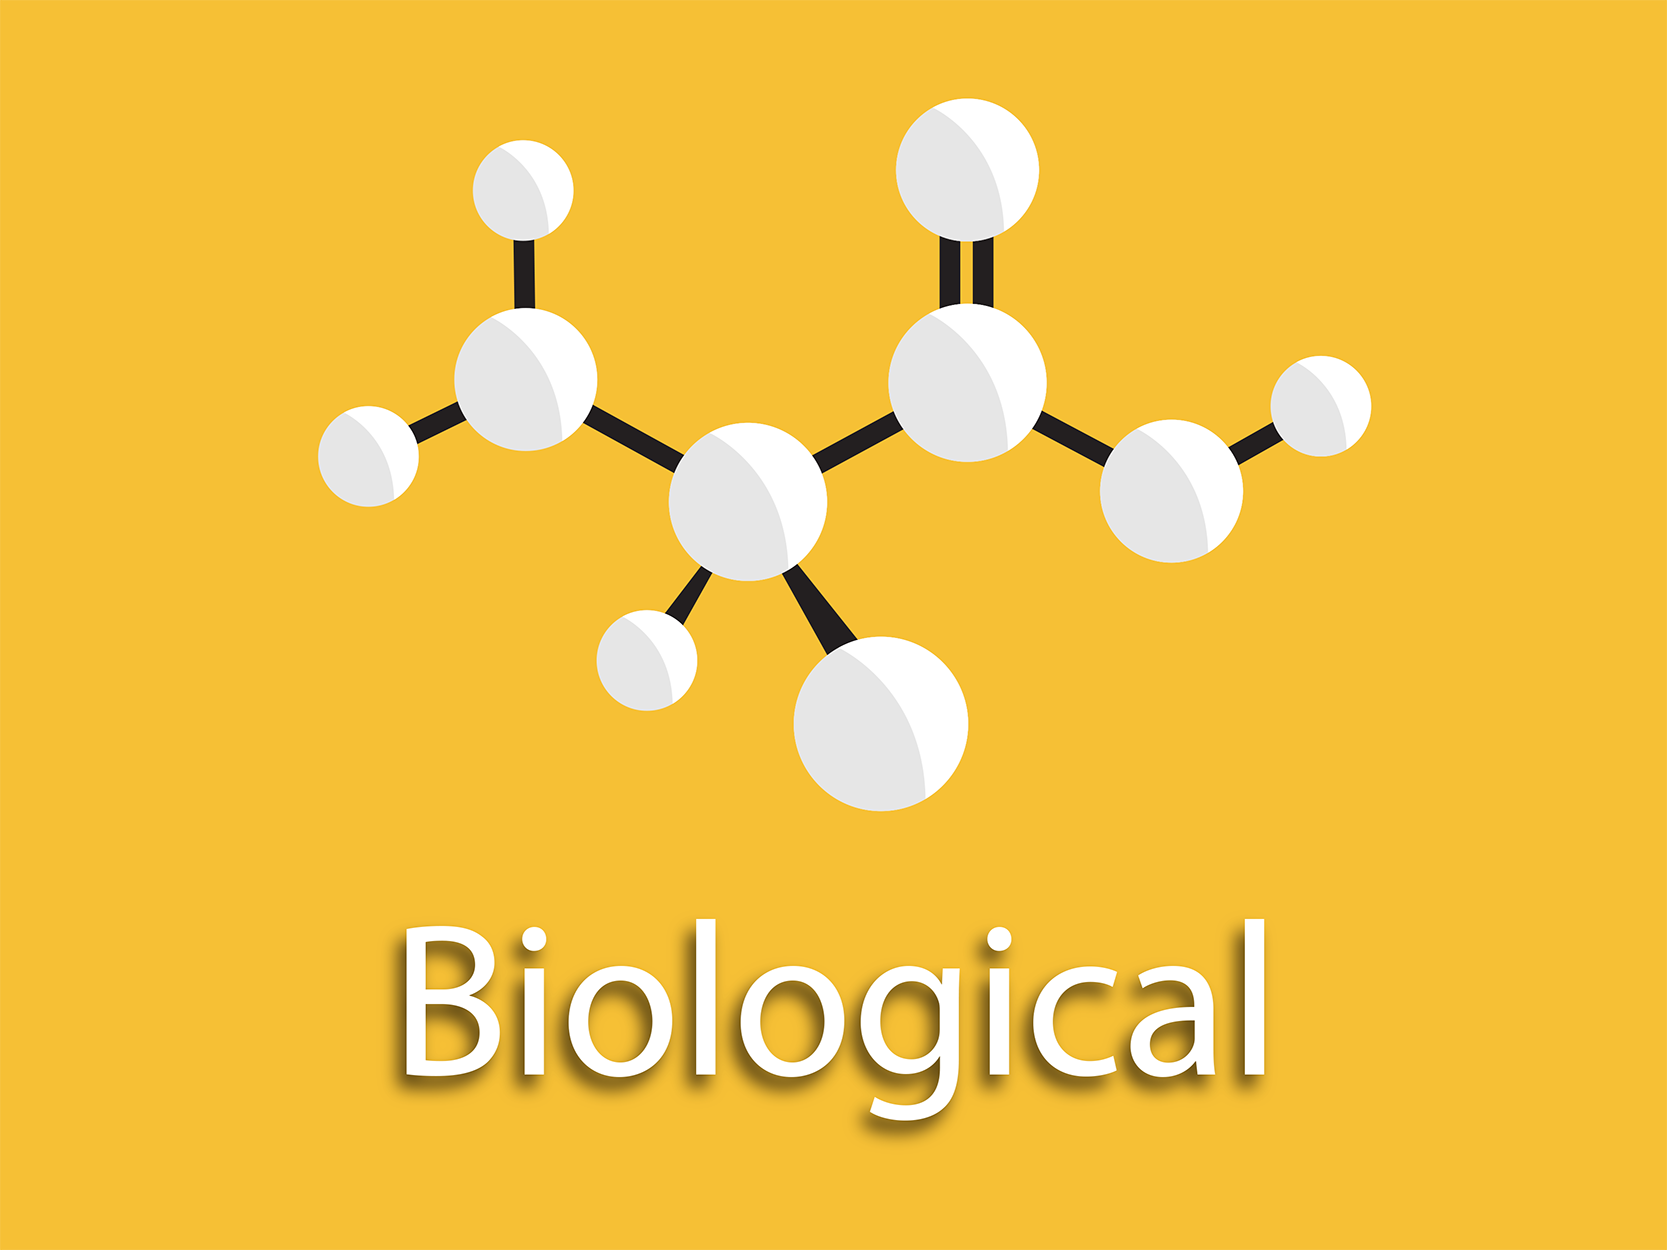 Click here to see the full list of biological tools